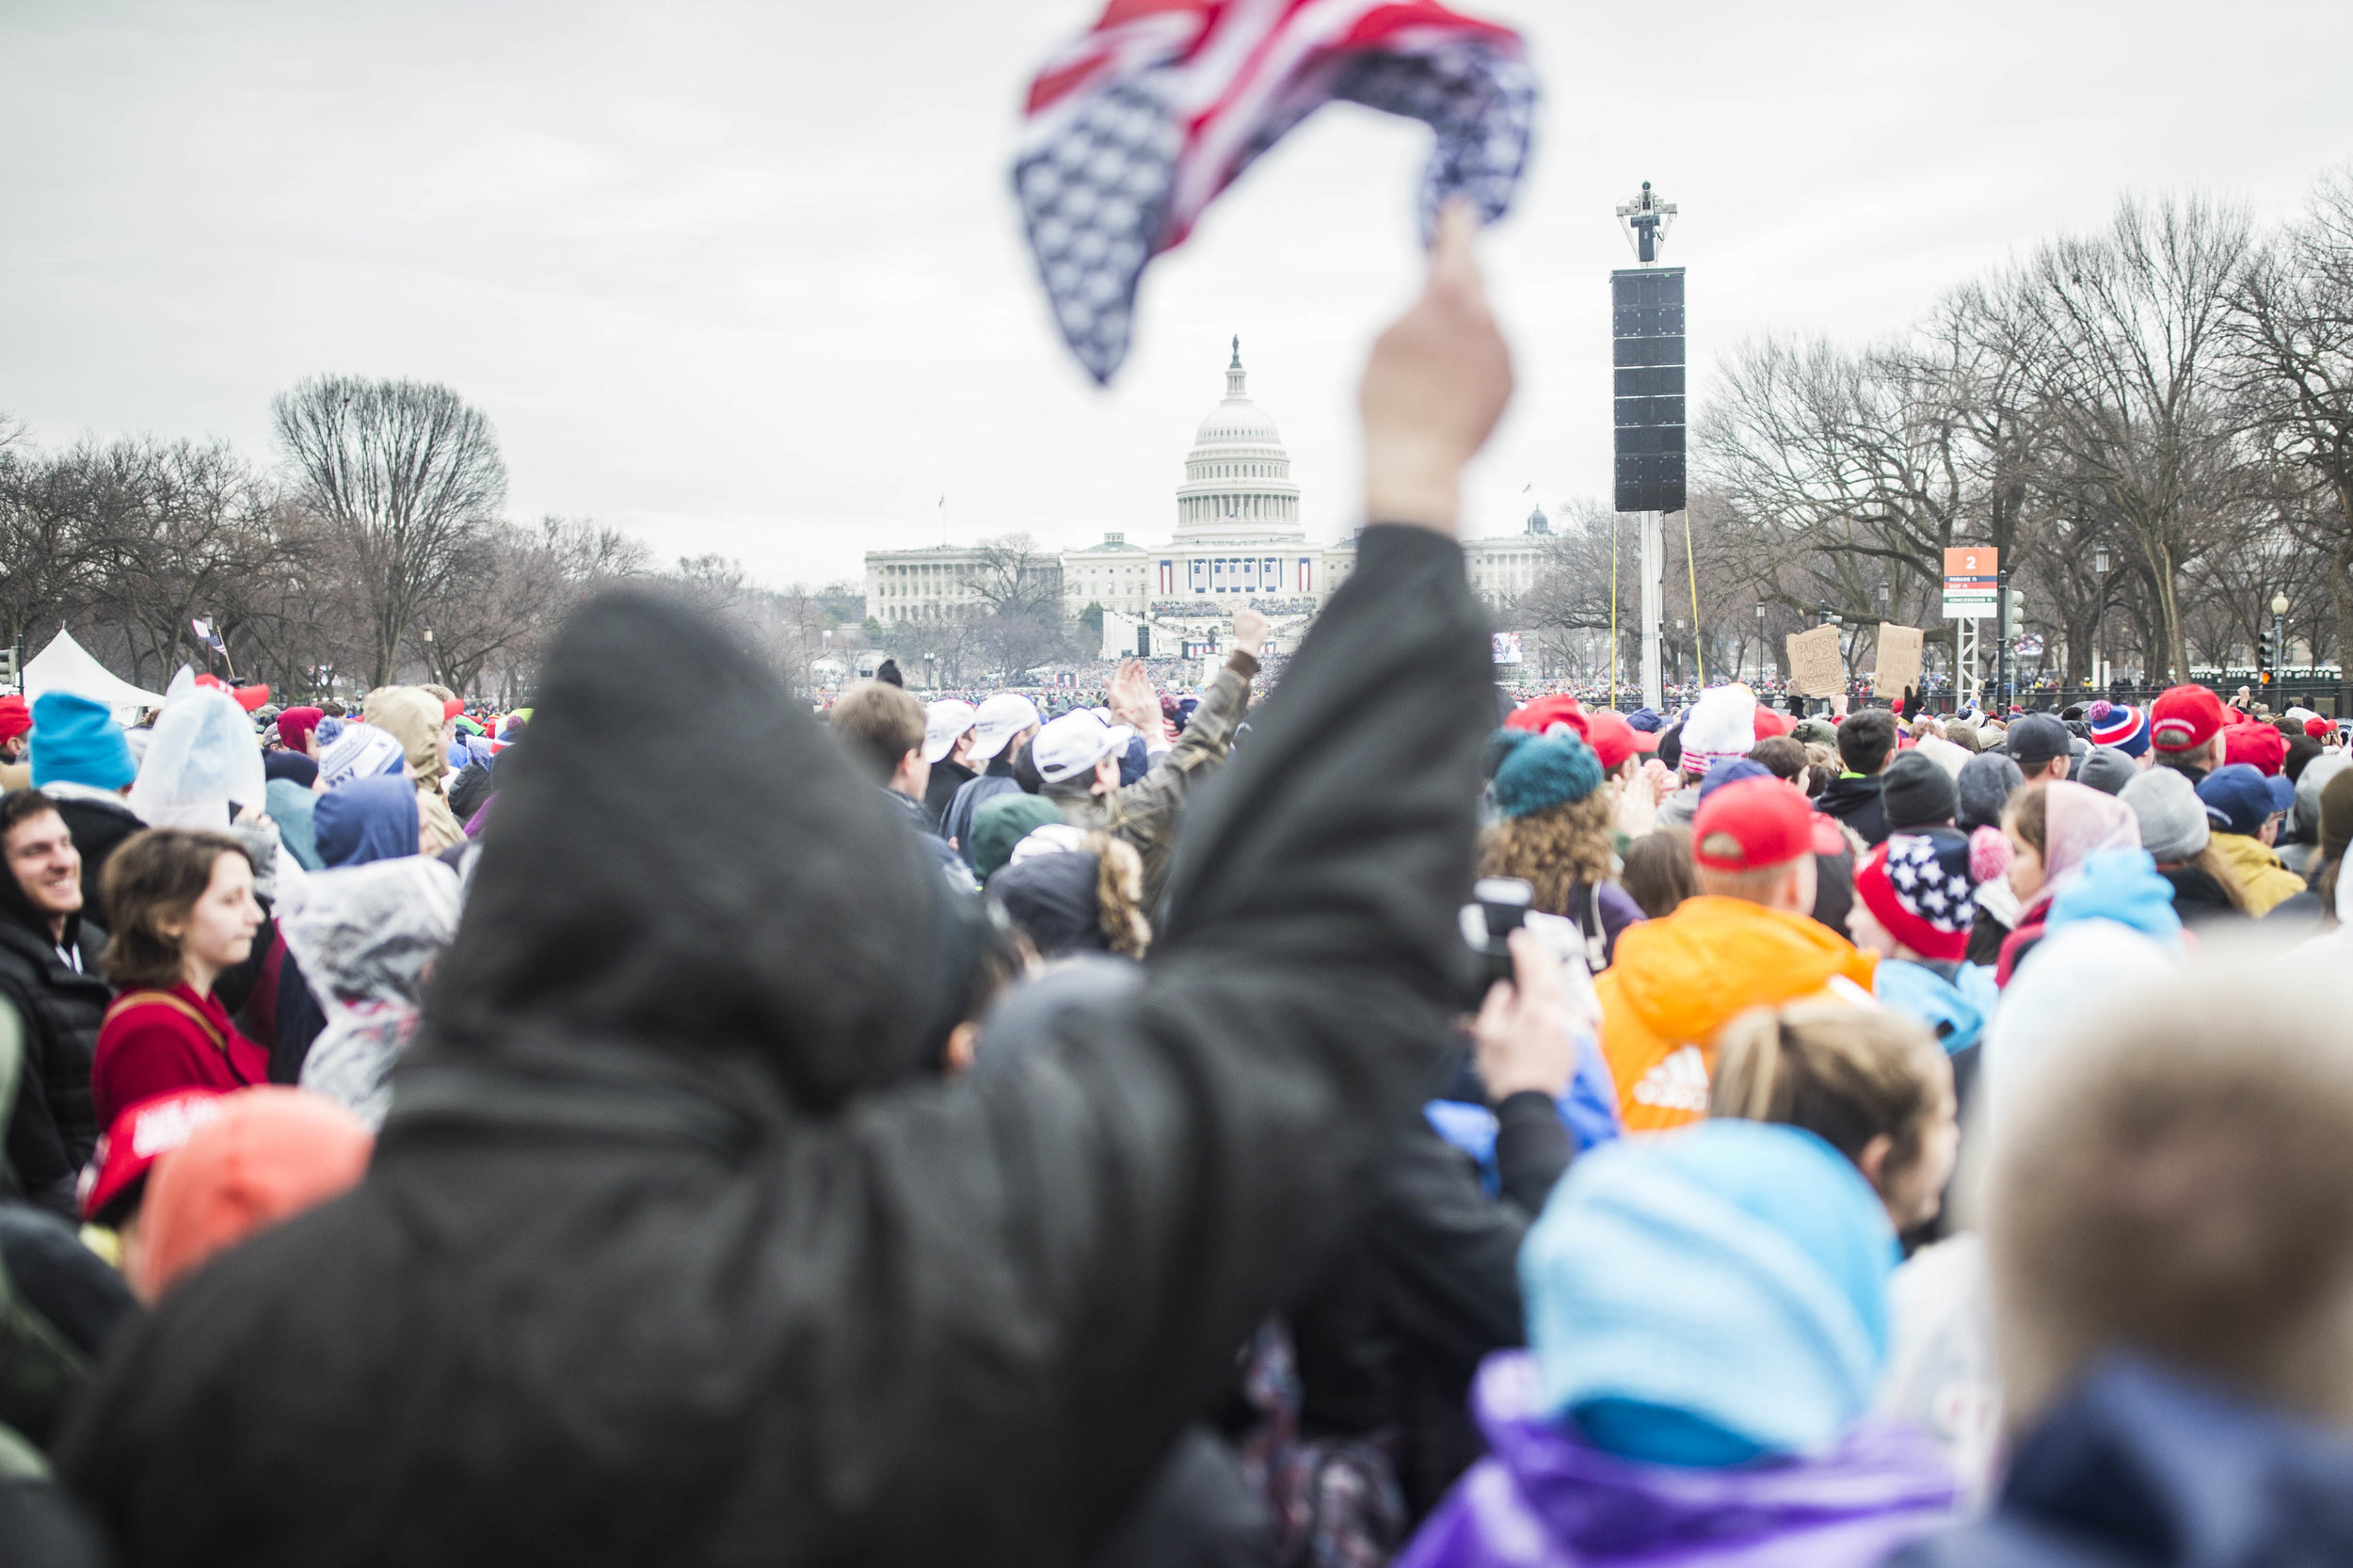  A supporter waves an American flag at the National Mall as Donald Trump is sworn in as the 45th president of the US on January 20, 2017 